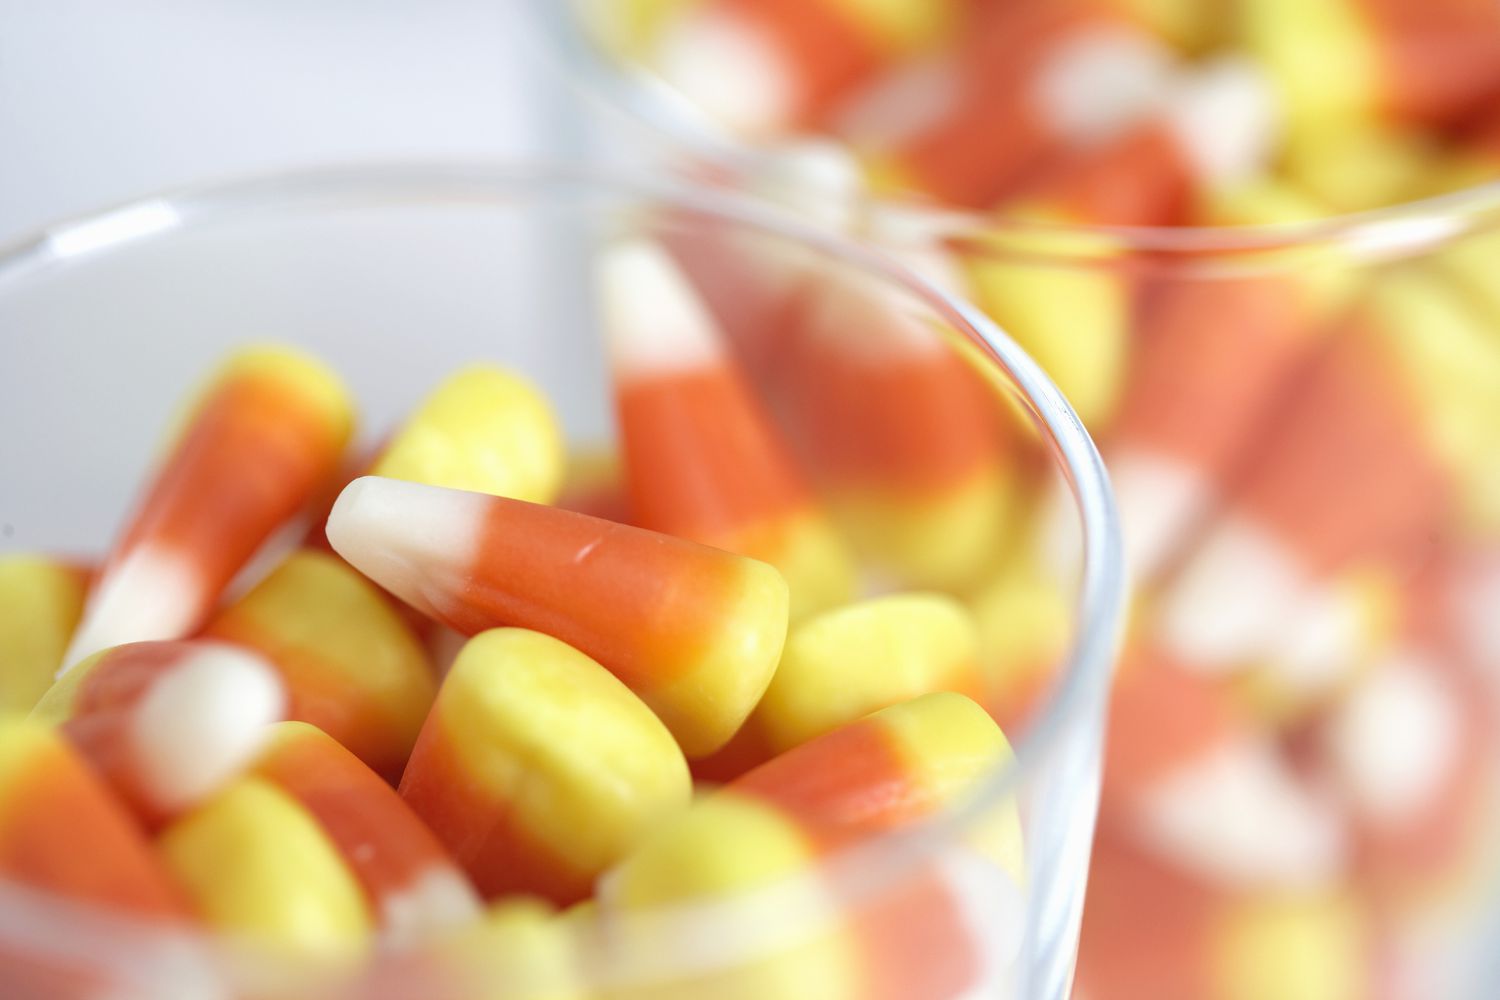 Candy in jars, close-up